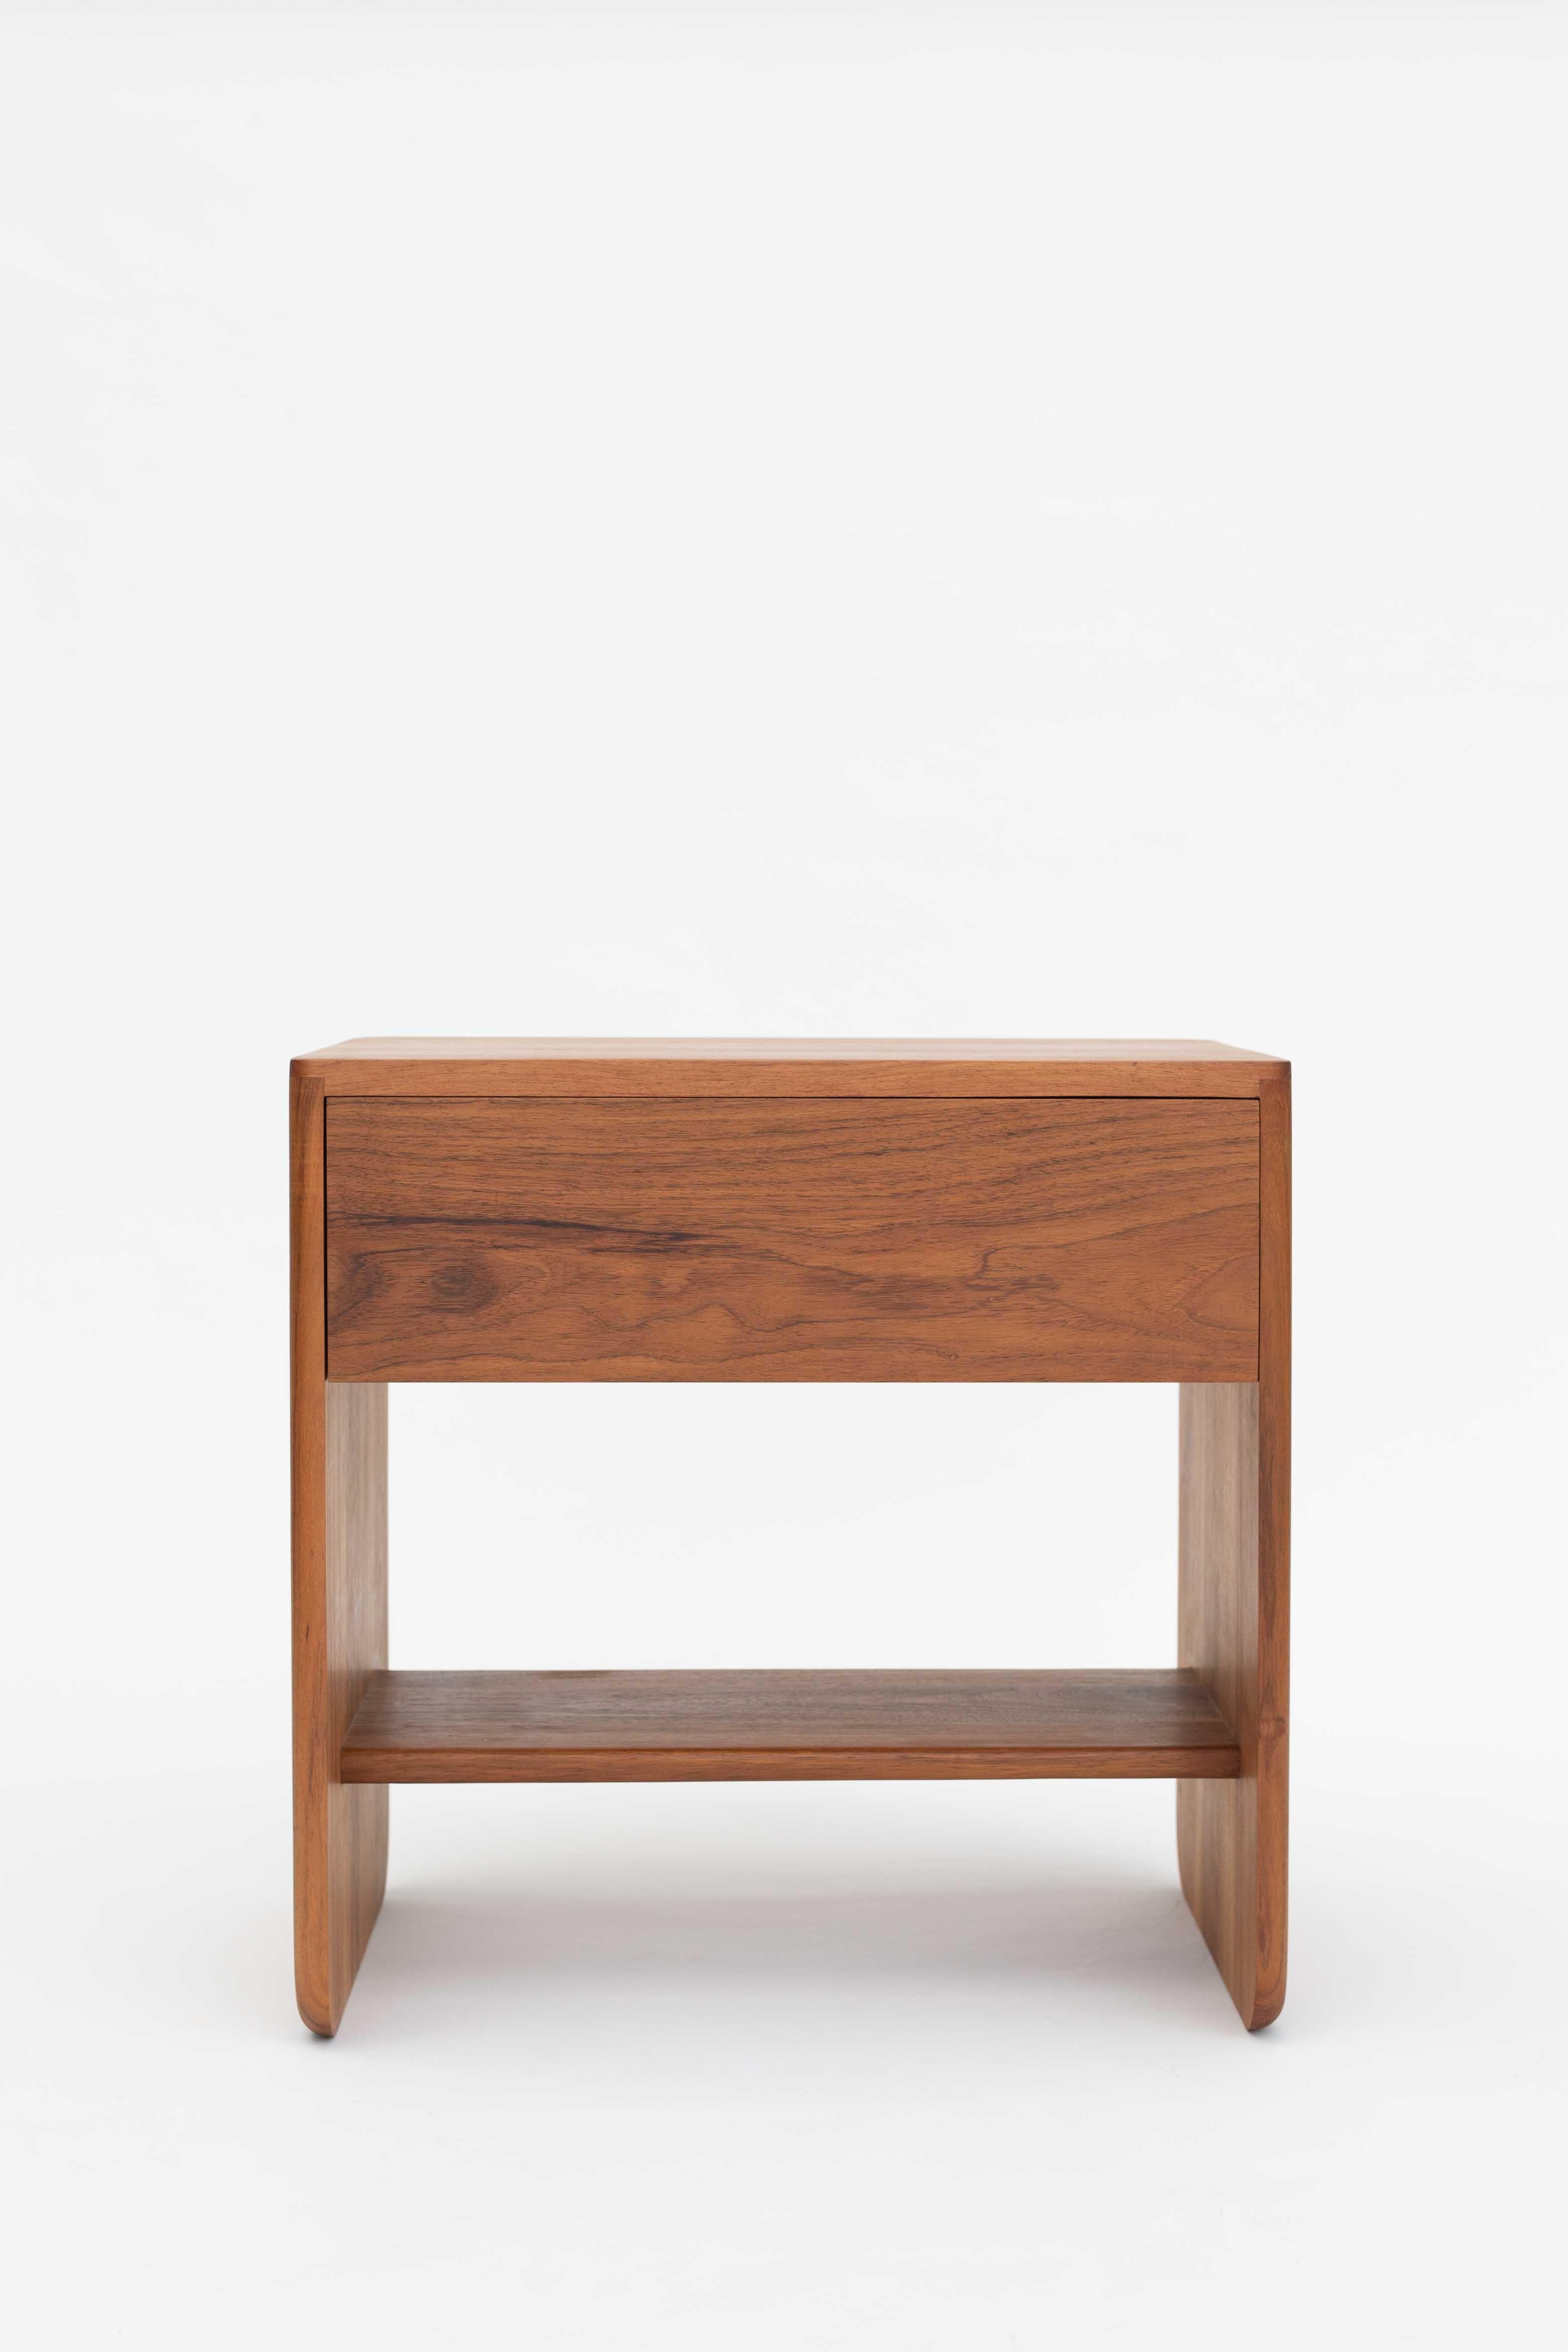 The Ox nightstand’s simple and practical design emphasizes the beauty of the wood’s grain and texture. The side edges of the top of the desk are slightly rounded making them stand out therefore resulting in a piece with beautifully detailed